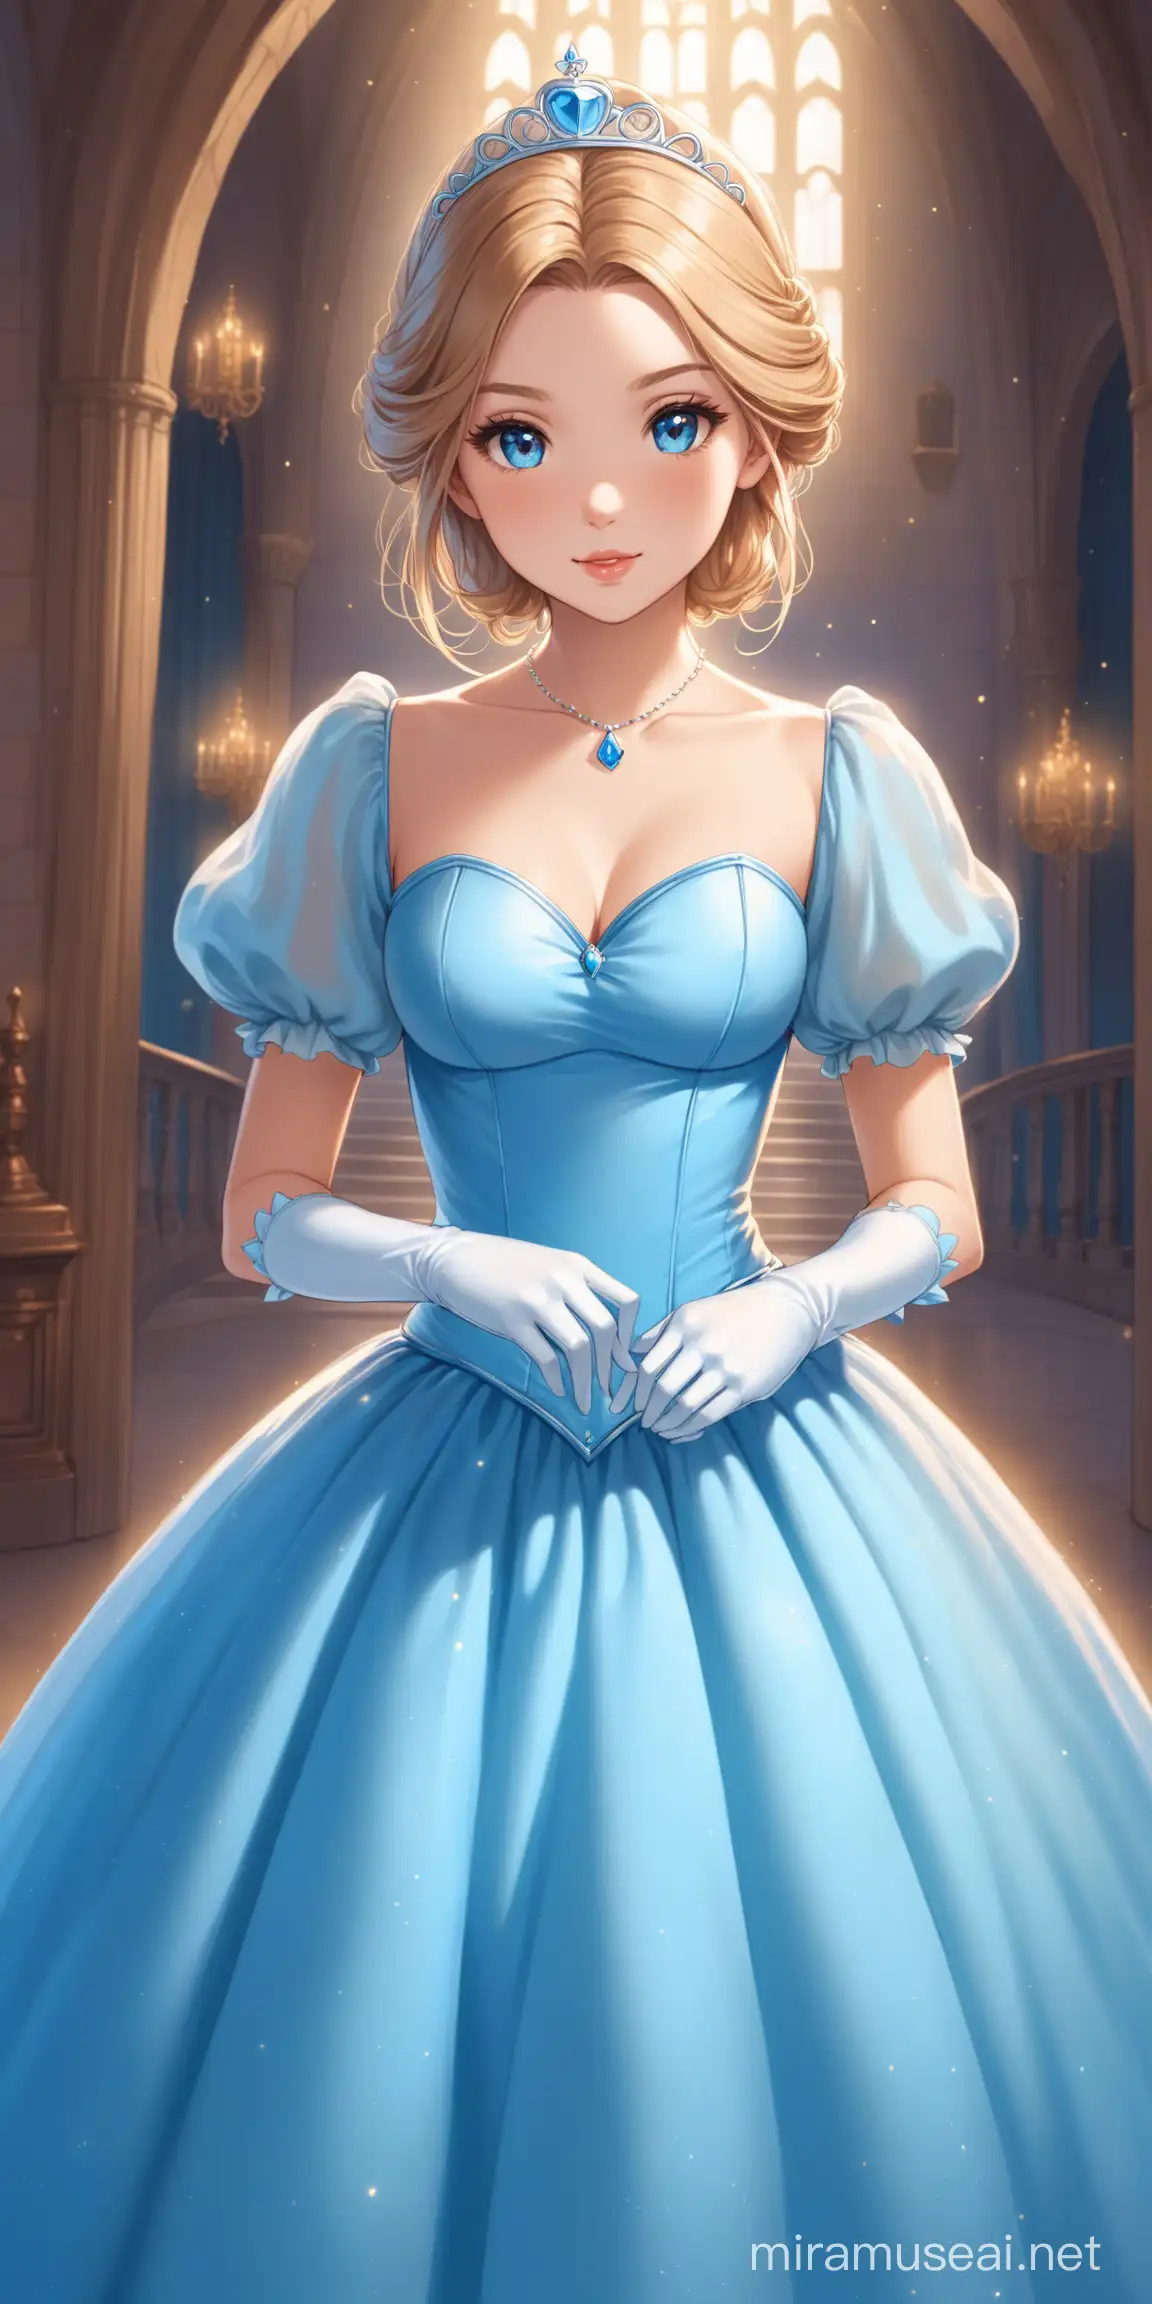 Girl in blue ballgown, puffed sleeves, gloves,Cinderella themed, front facing, looking into the camera, 